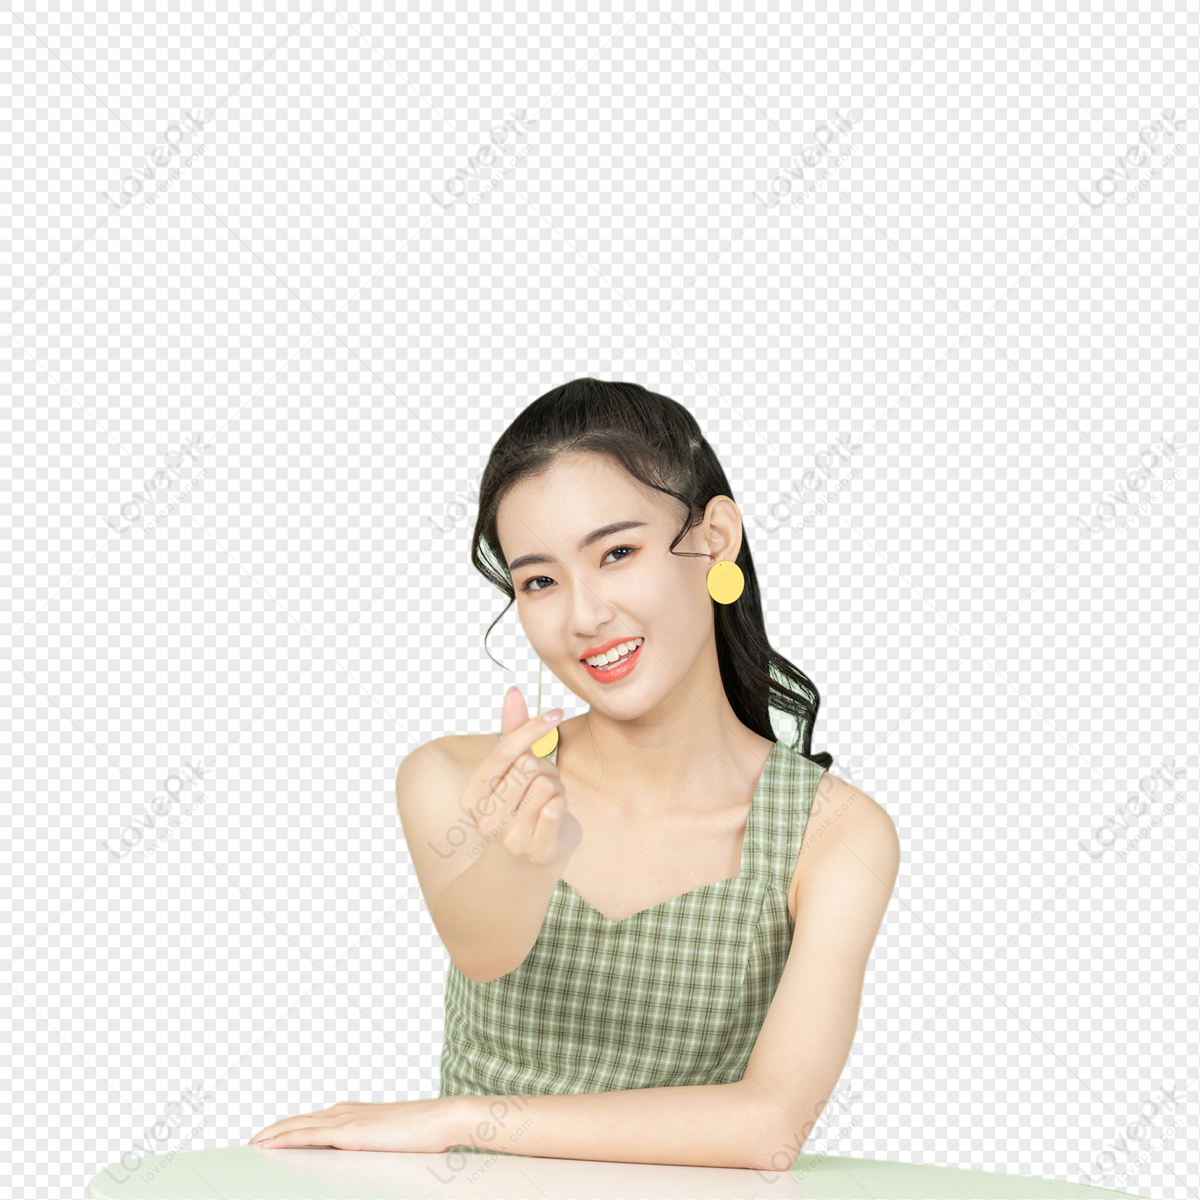 Summer Female Deprinches PNG Images With Transparent Background | Free ...